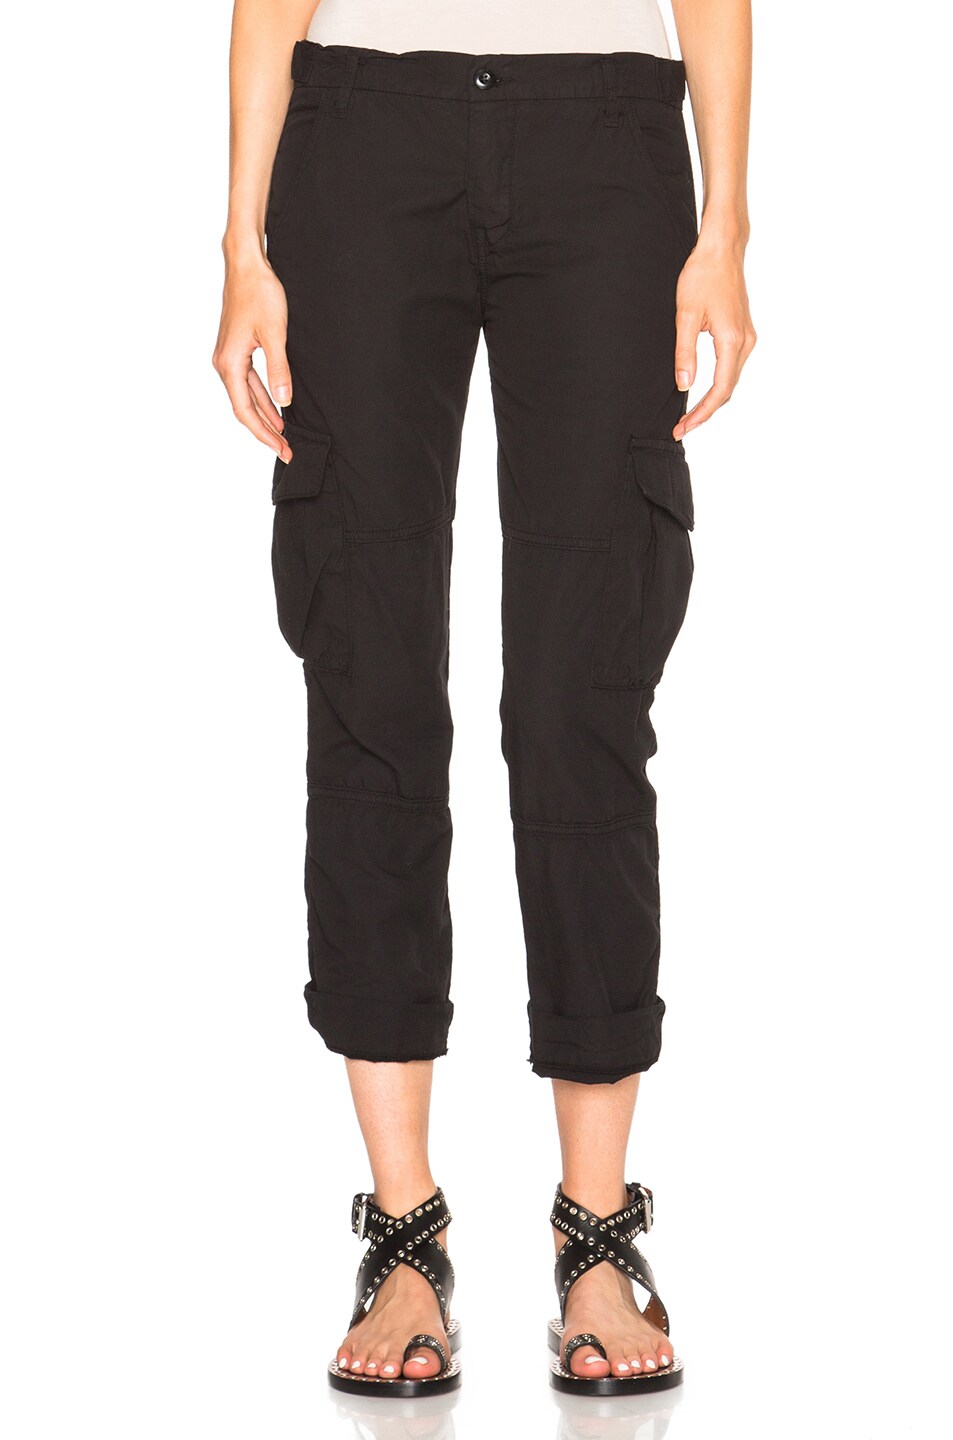 Image 1 of NSF All Day NSF Basquiat Pants in Black